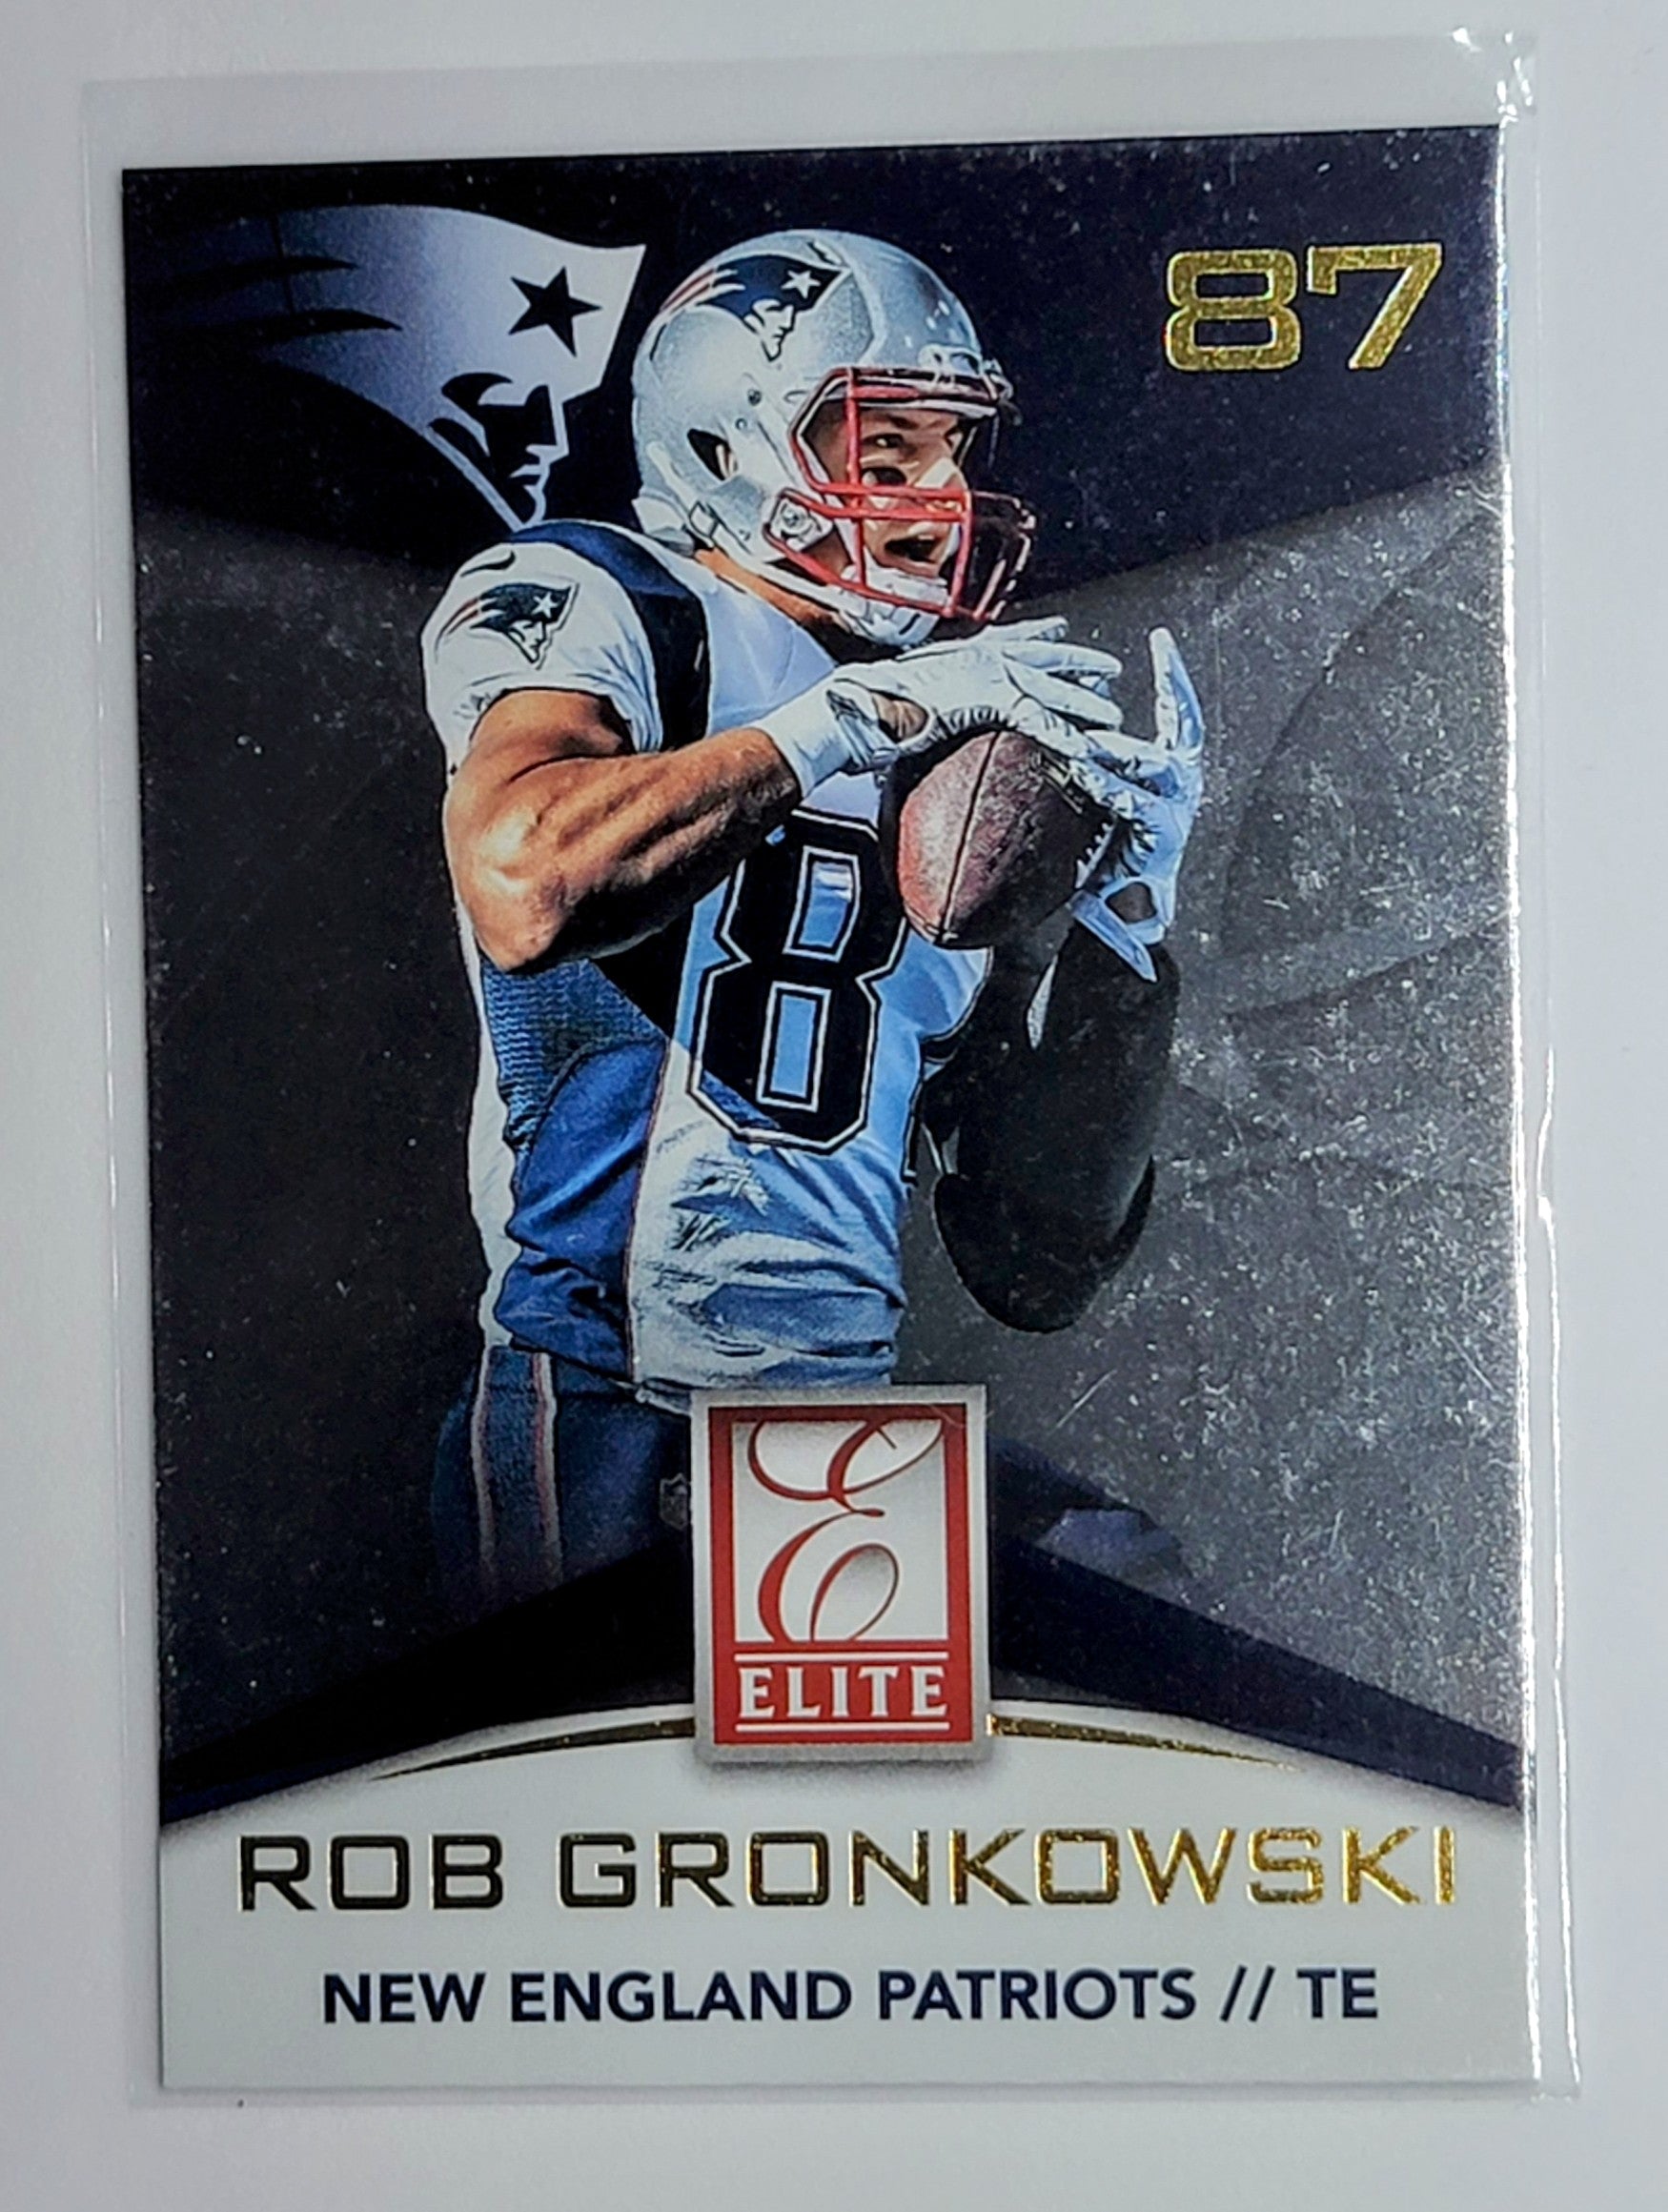 2015 Donruss Rob Gronkowski
Elite New England Patriots Football
  Card  TH1CB simple Xclusive Collectibles   